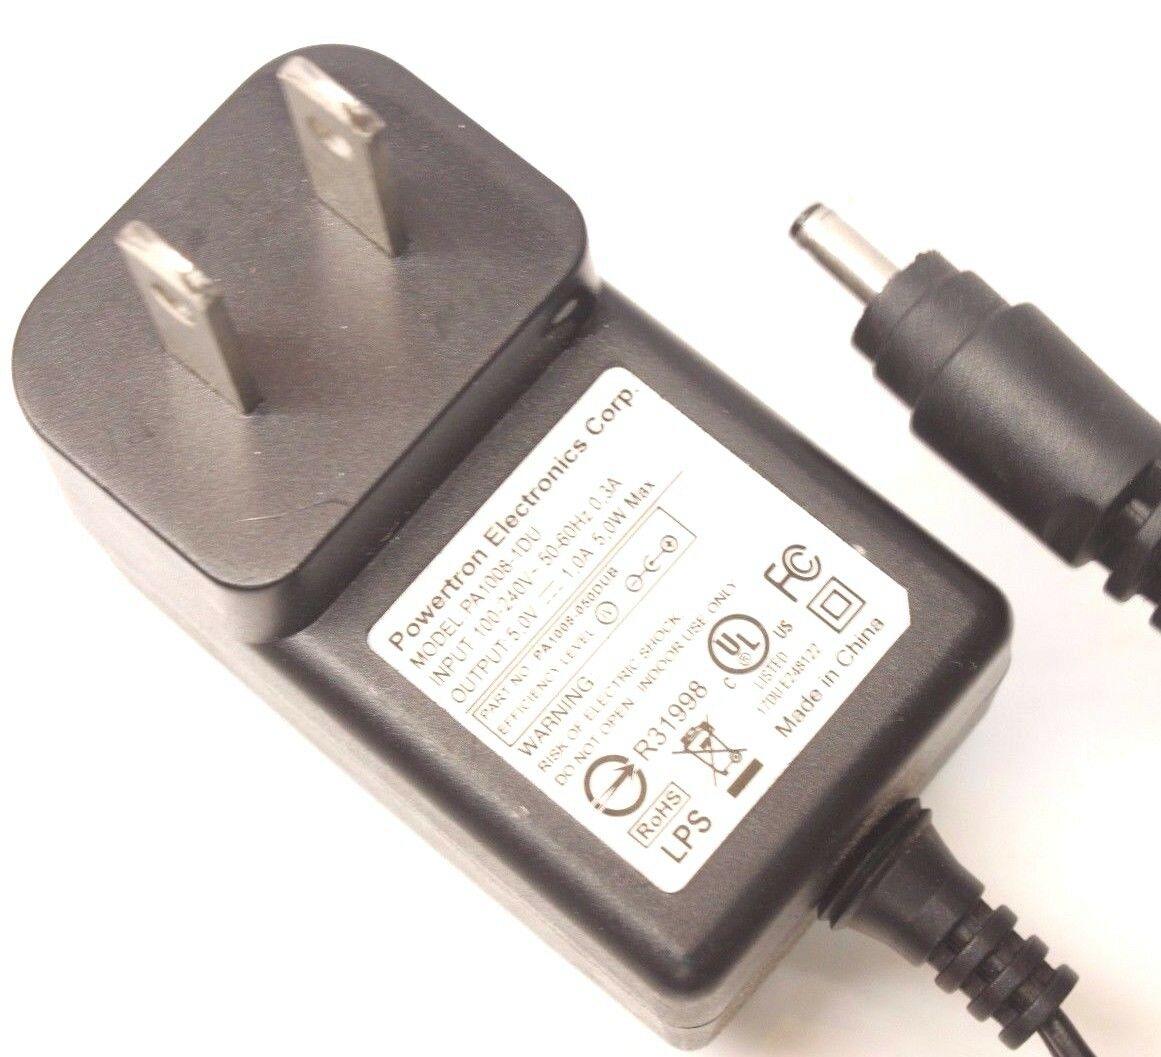 PA1008-1DU AC Power Supply Adapter Output 5V DC 1A for Rocketfish HDMI Switch Model Number PA1008-1DU Brand: PEC Type: